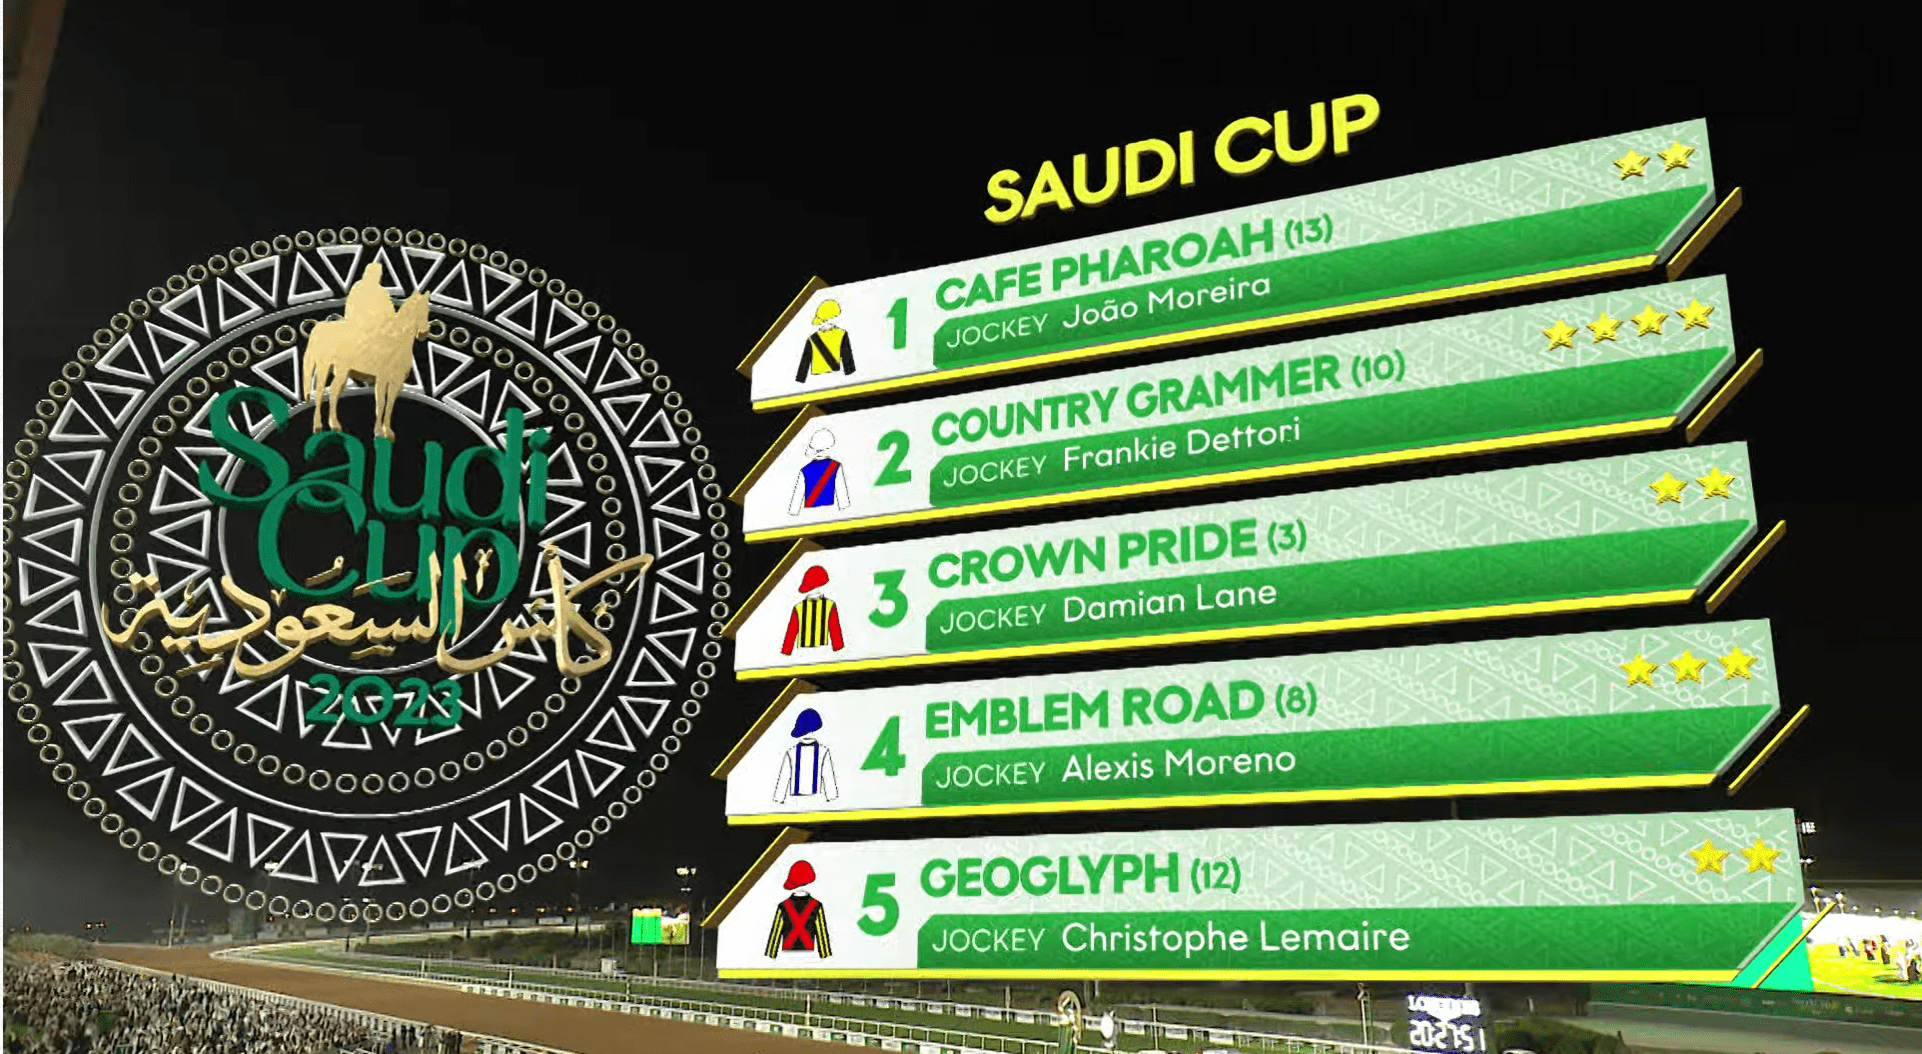 Saudi Cup Project by Girraphic